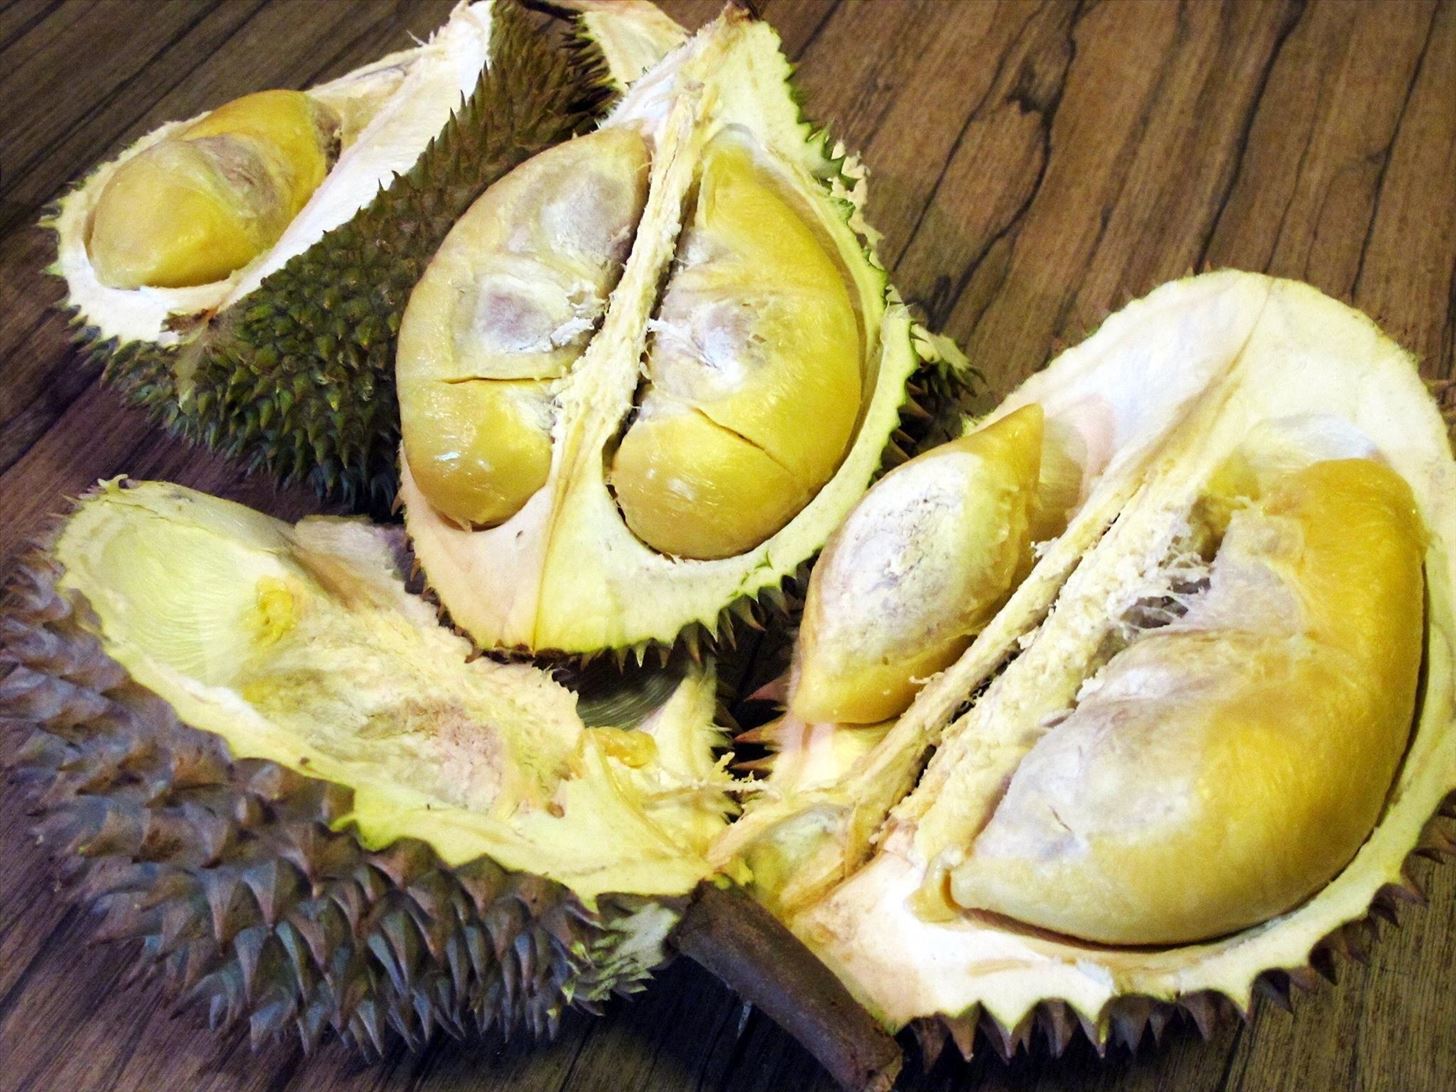 Weird Ingredient Wednesday: Durian Stinks Like Hell but Tastes Heavenly